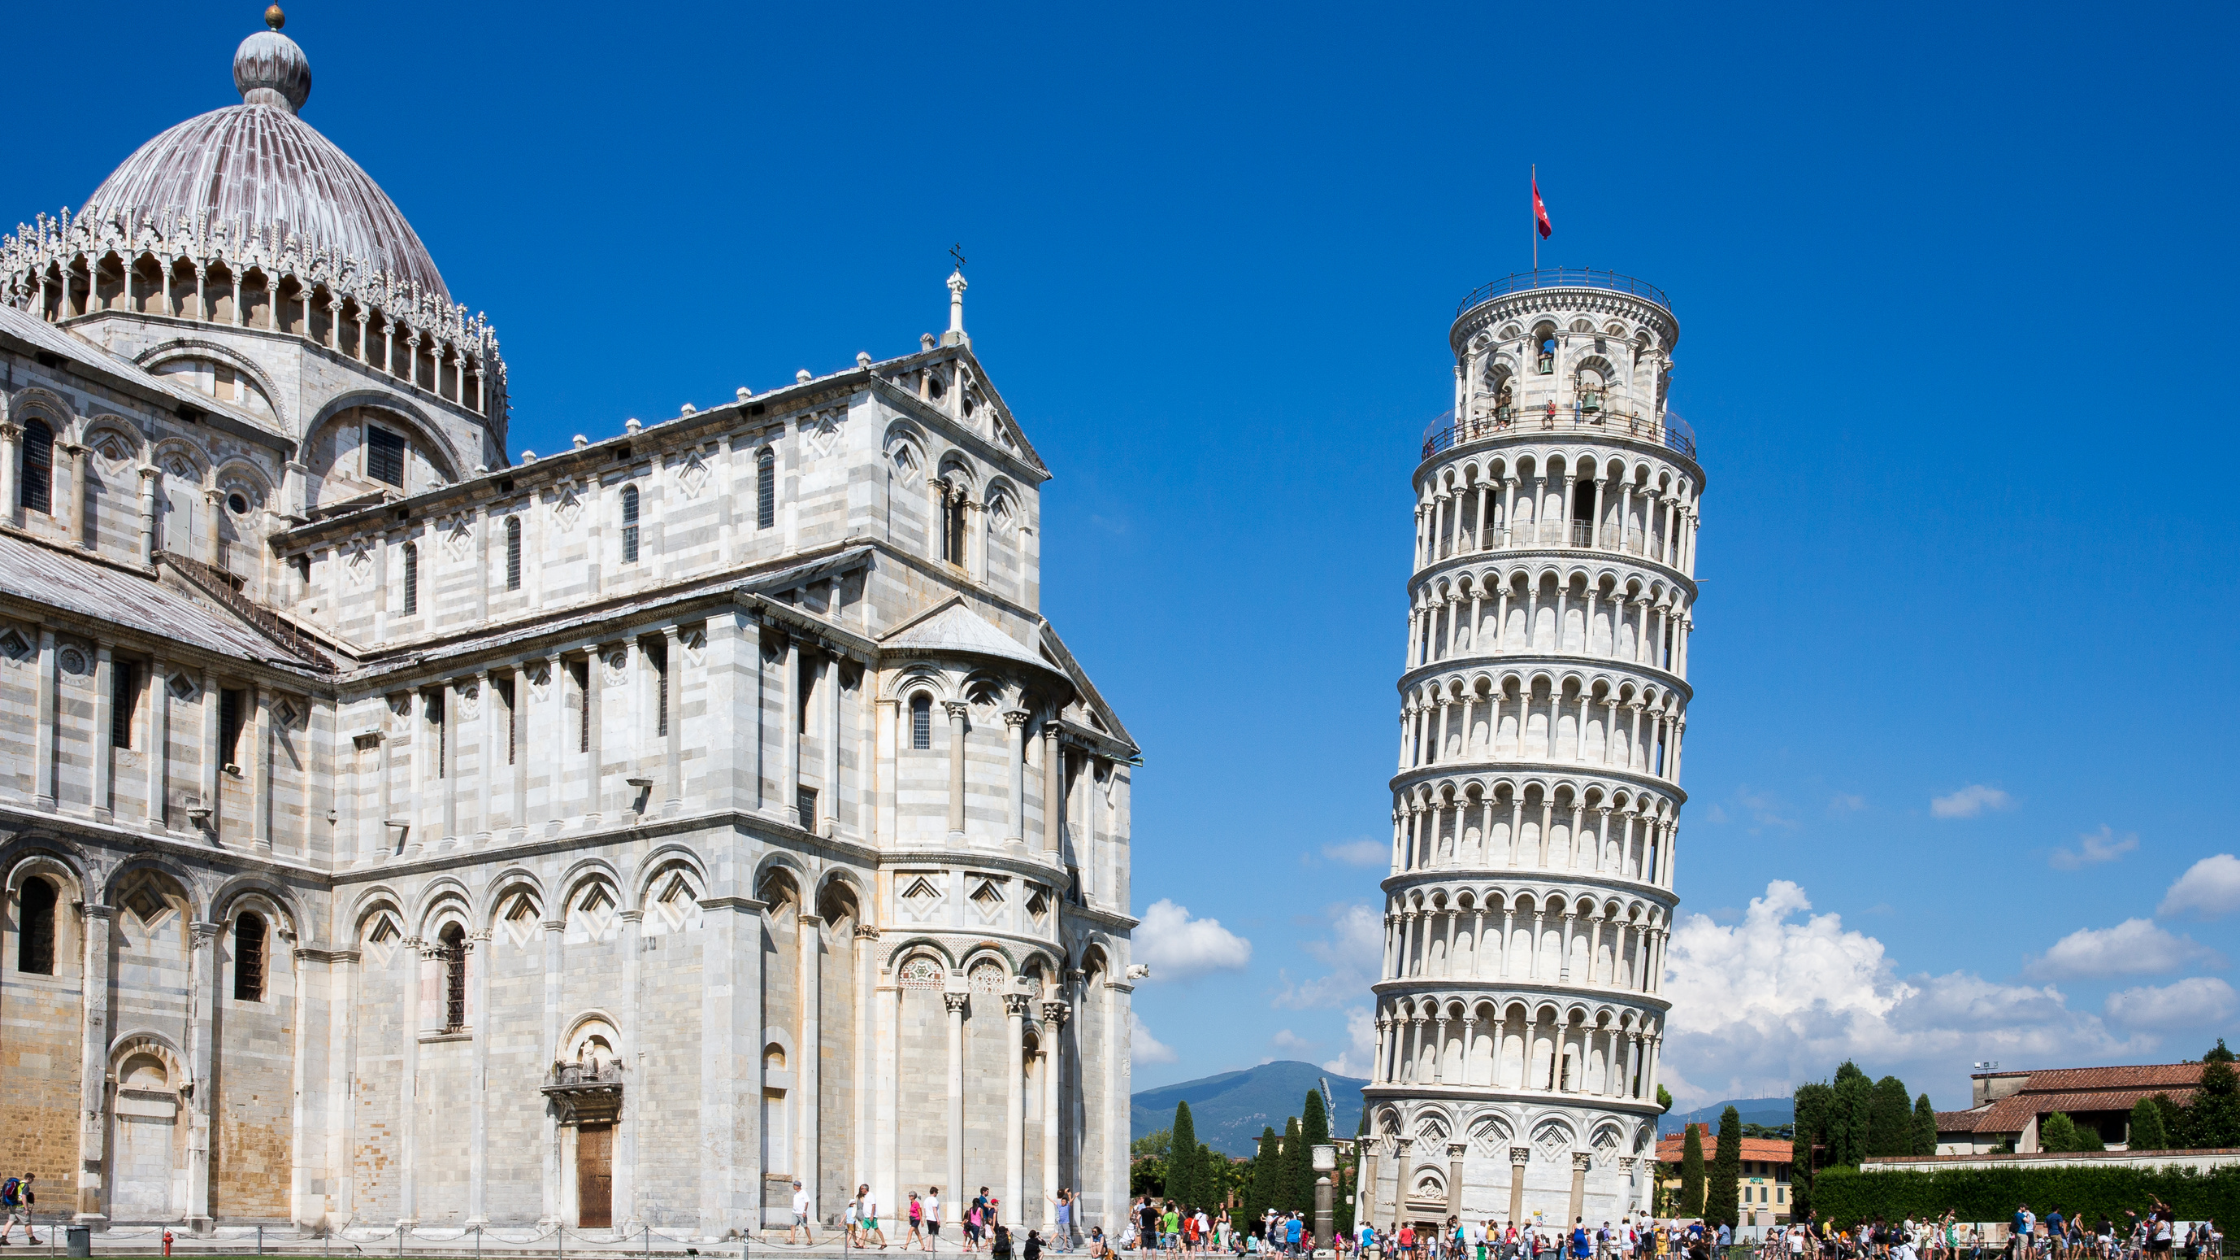 Why is the Tower of Pisa leaning? featured image